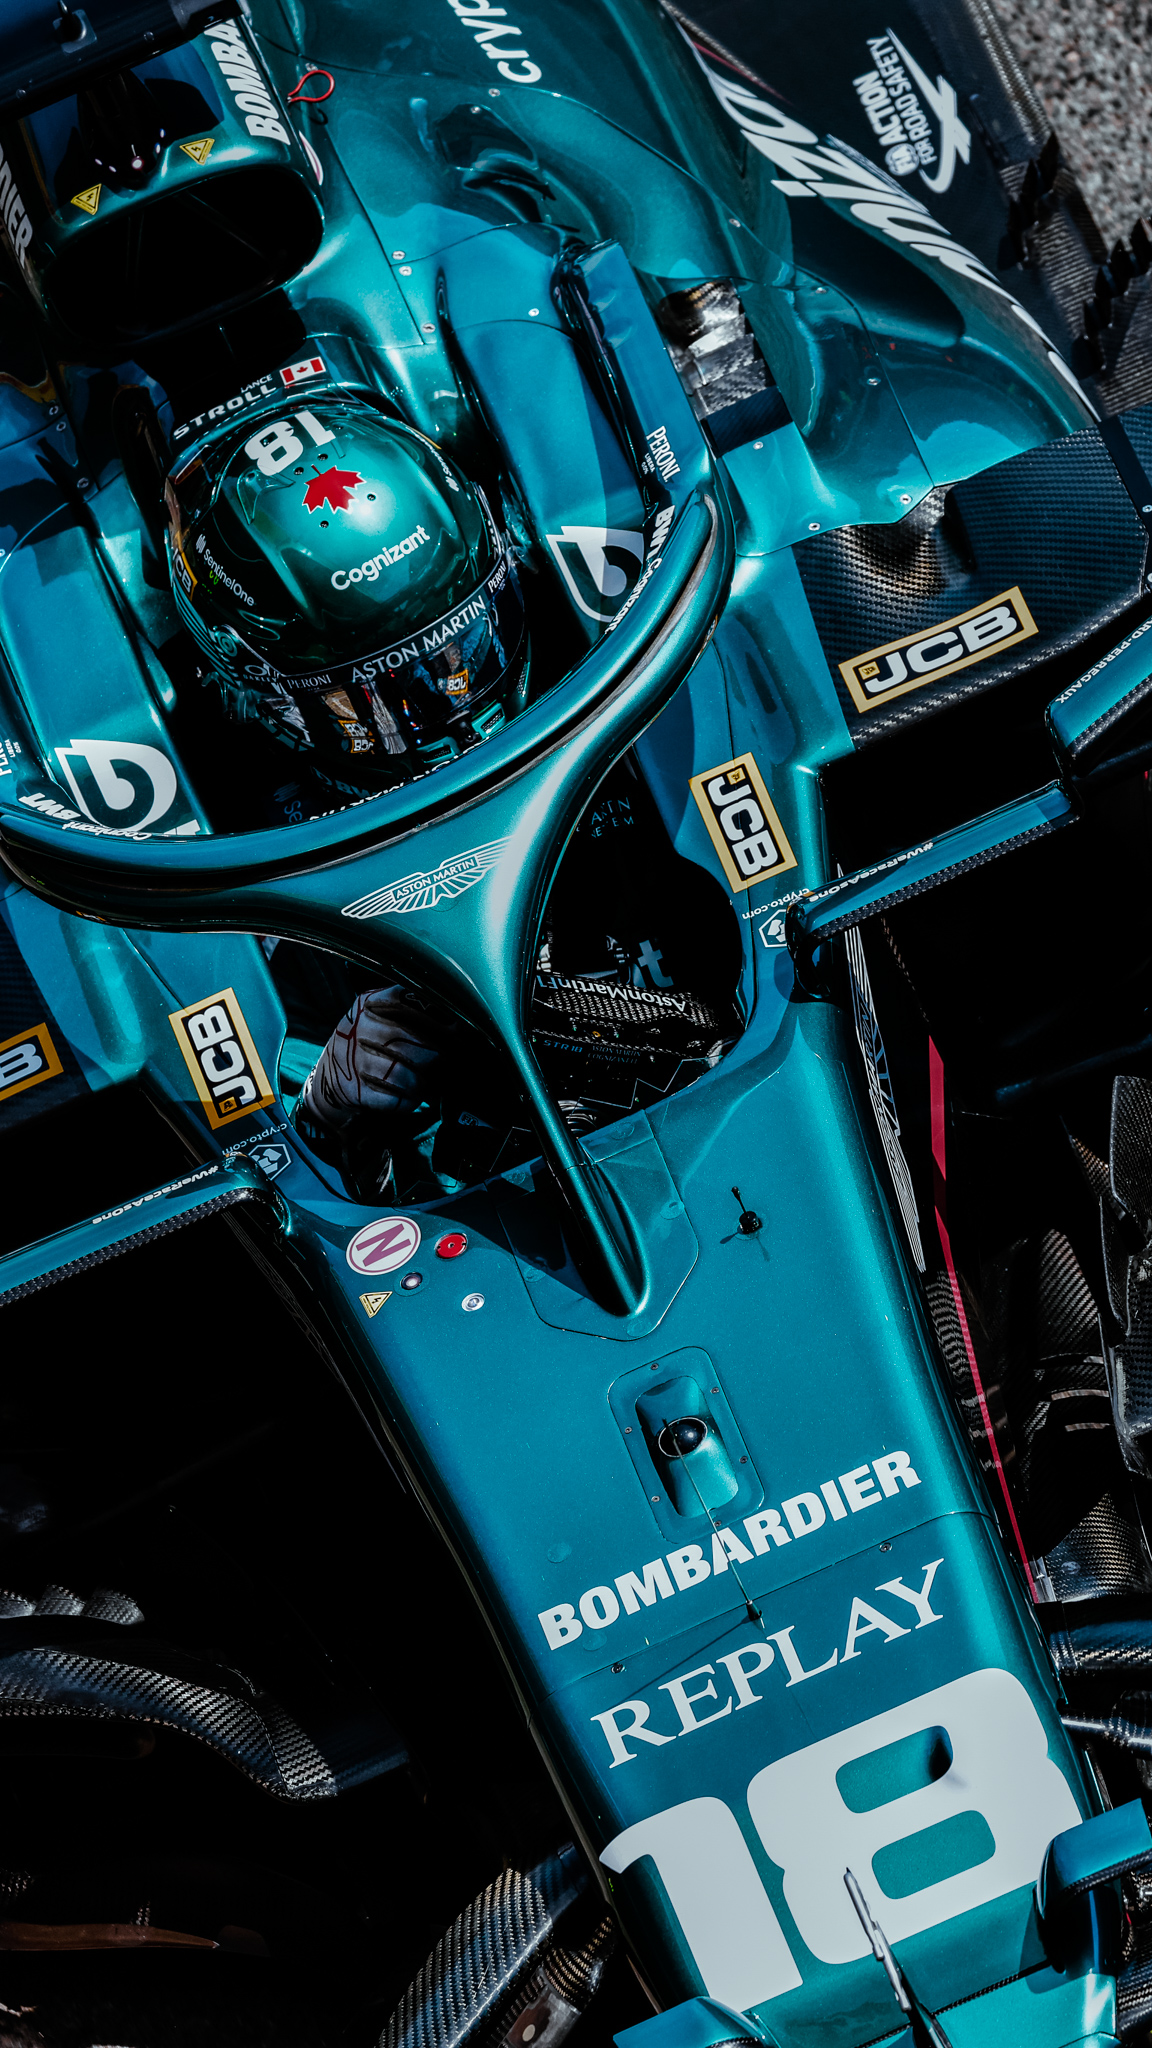 Aston Martin Aramco Cognizant F1 Team you're looking for a new desktop wallpaper, we've got you covered